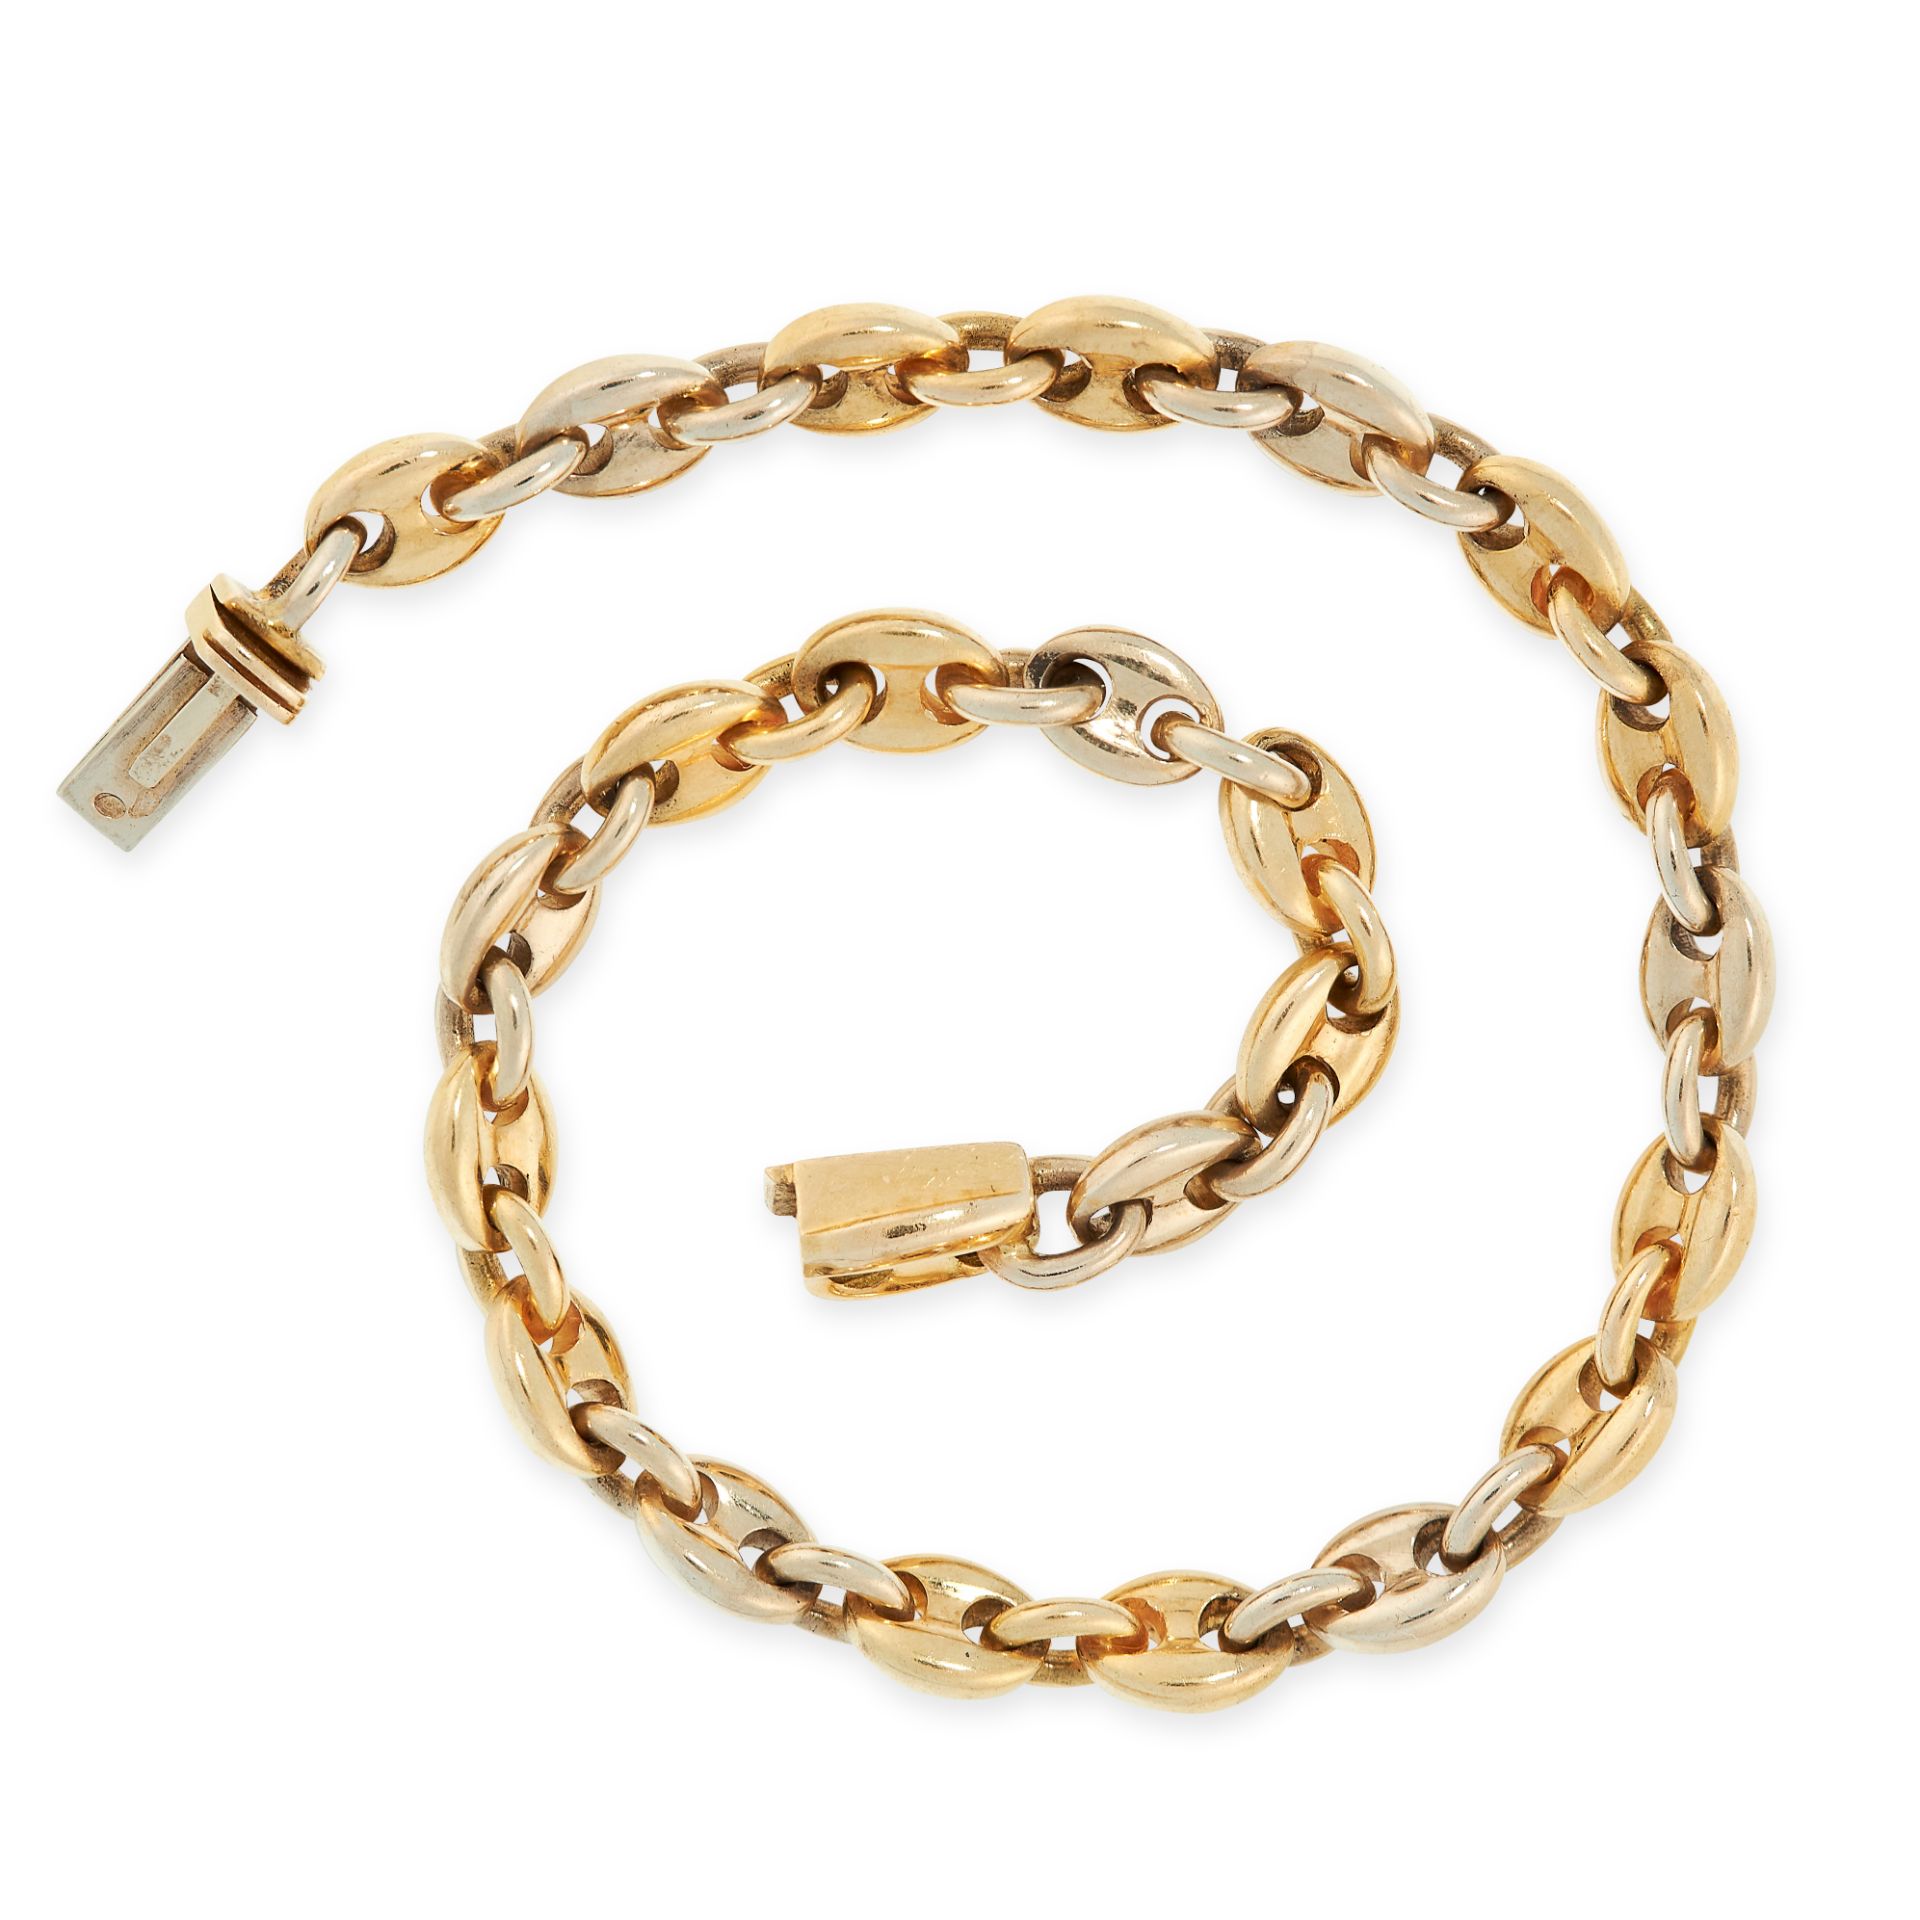 VINTAGE FANCY LINK BRACELET, CARTIER in 18ct yellow and white gold, formed of a single row of oval